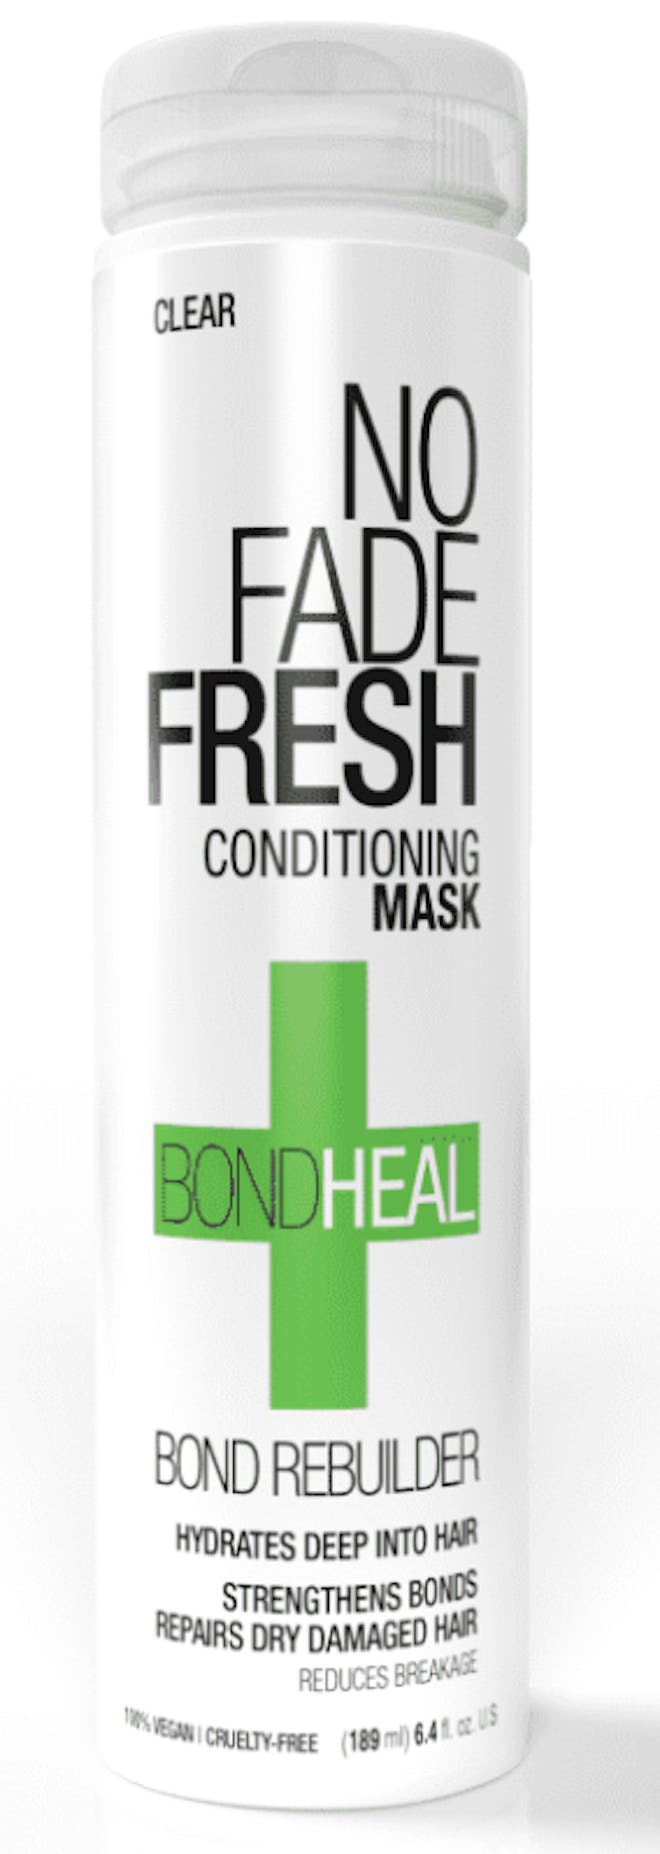 No Fade Fresh Clear Conditioning Mask for fall hair color